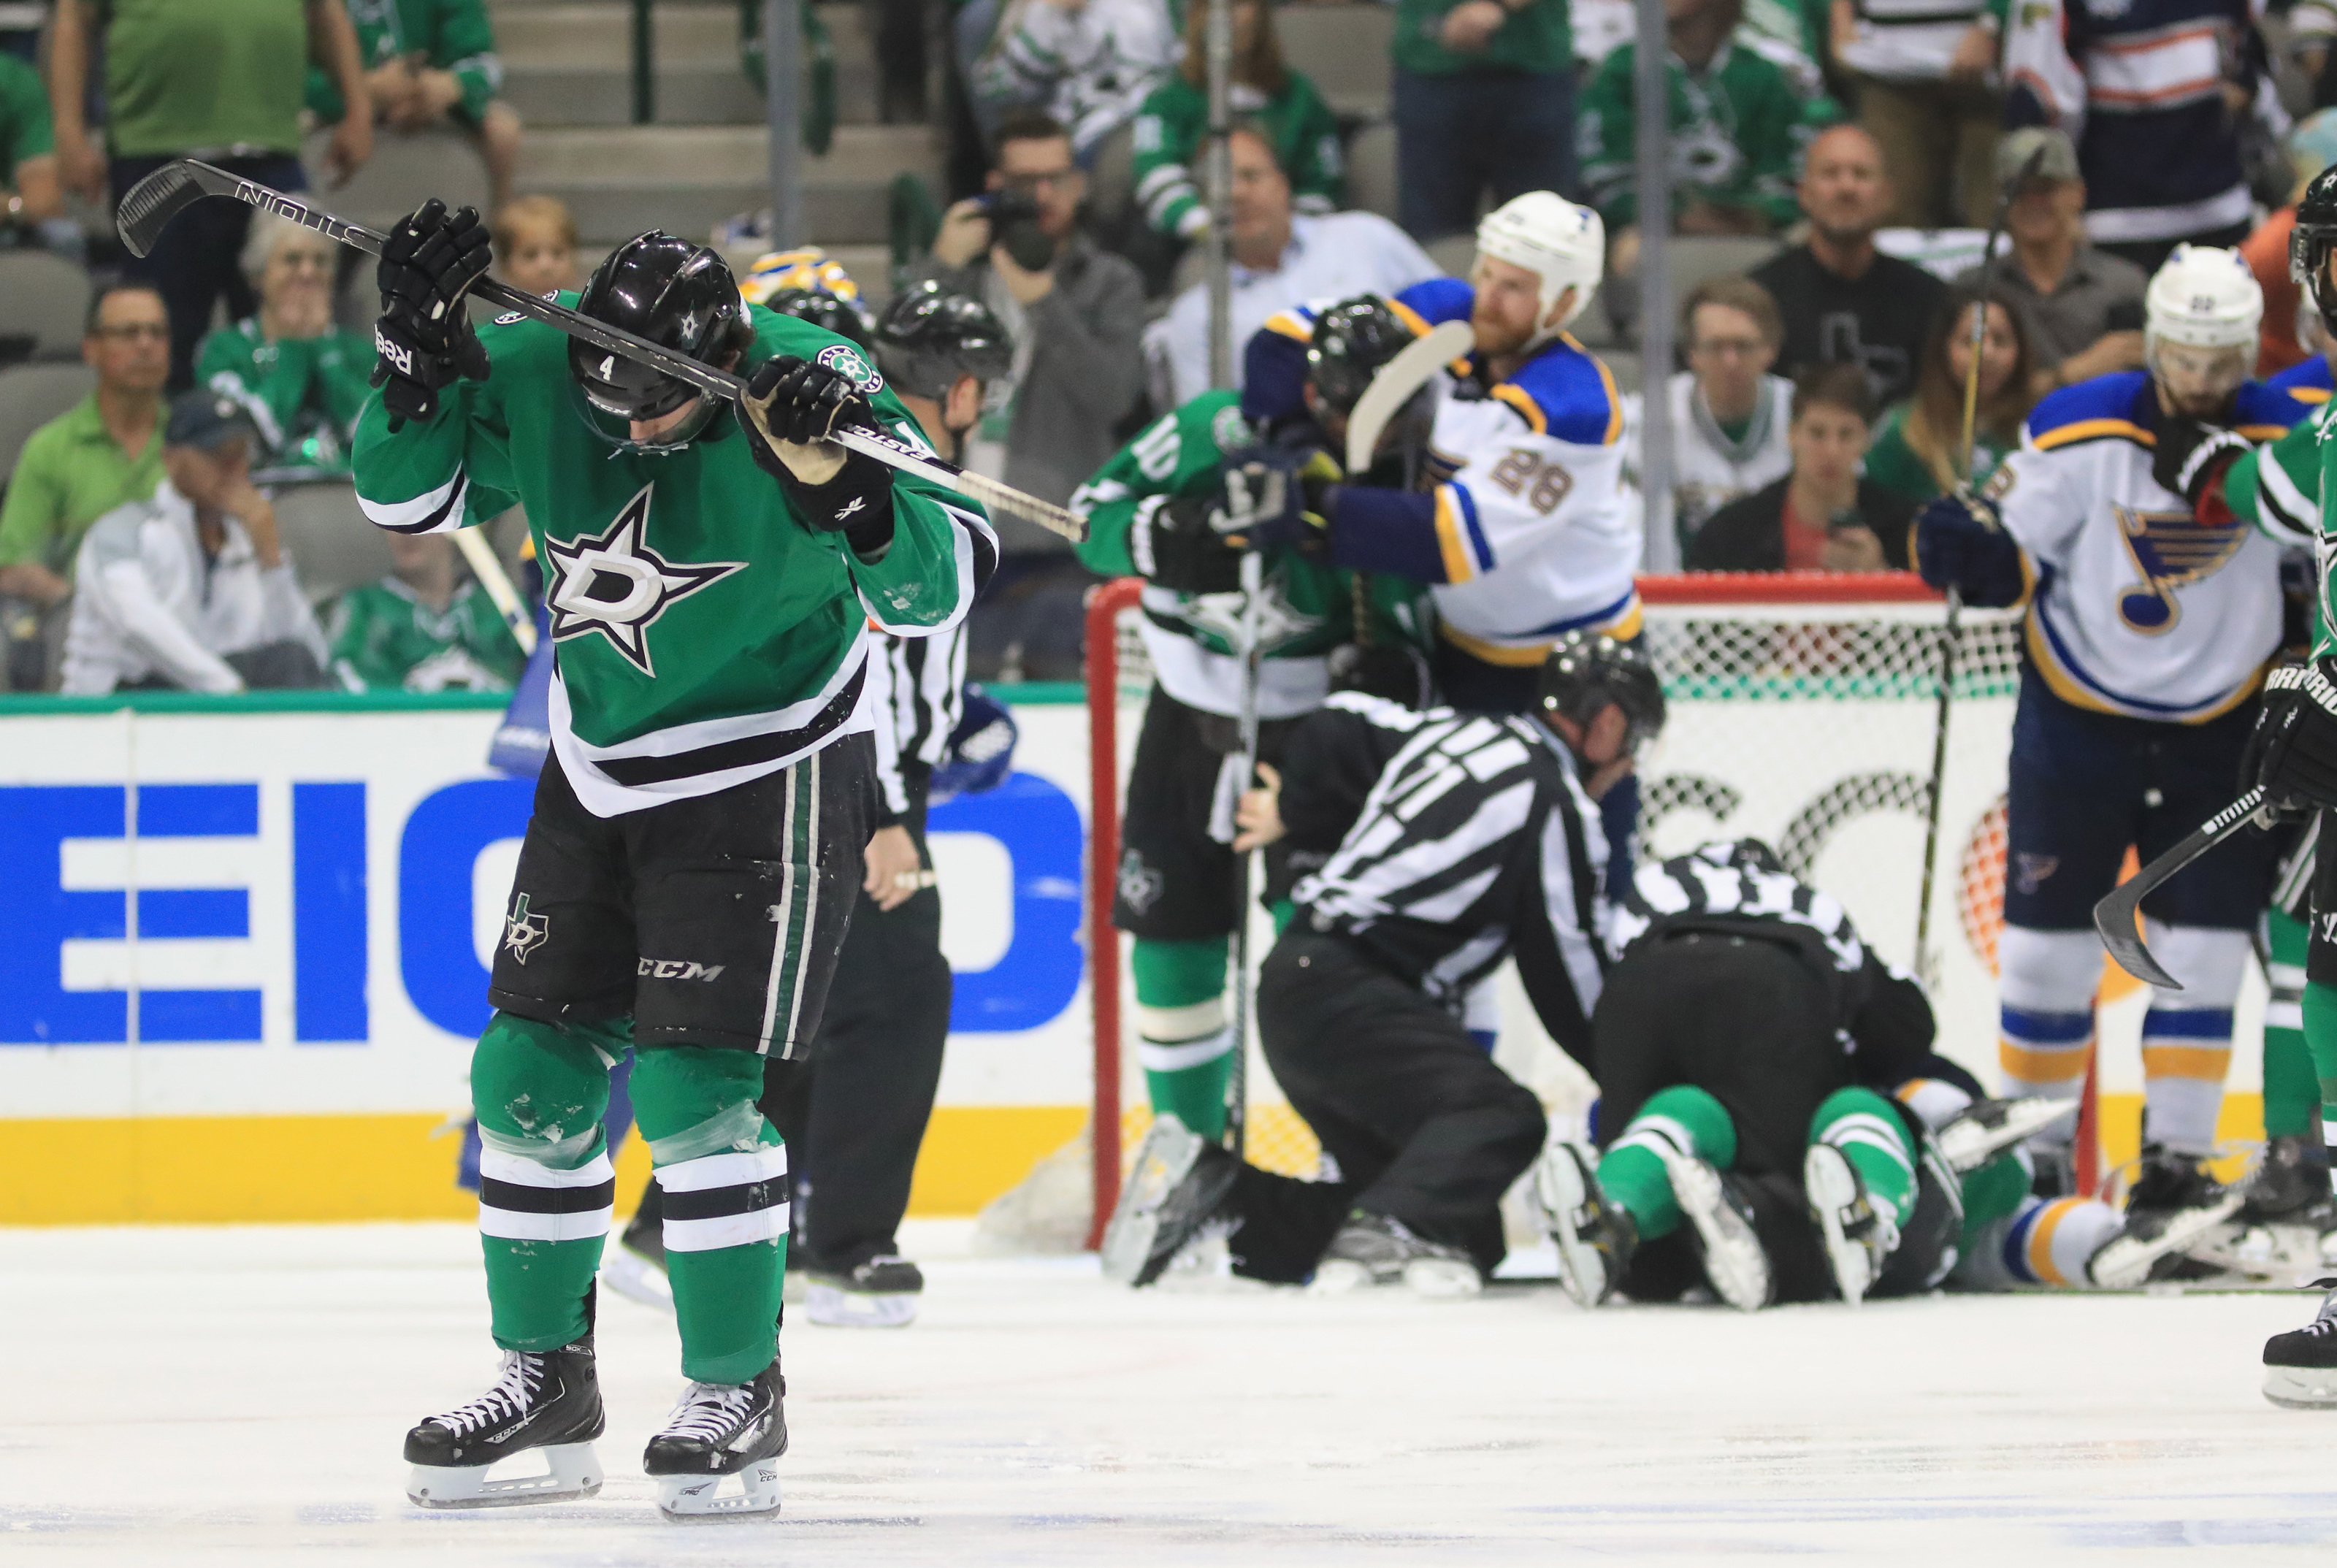 Dallas Stars shoot themselves in the foot losing 4-0 to the St. Louis Blues